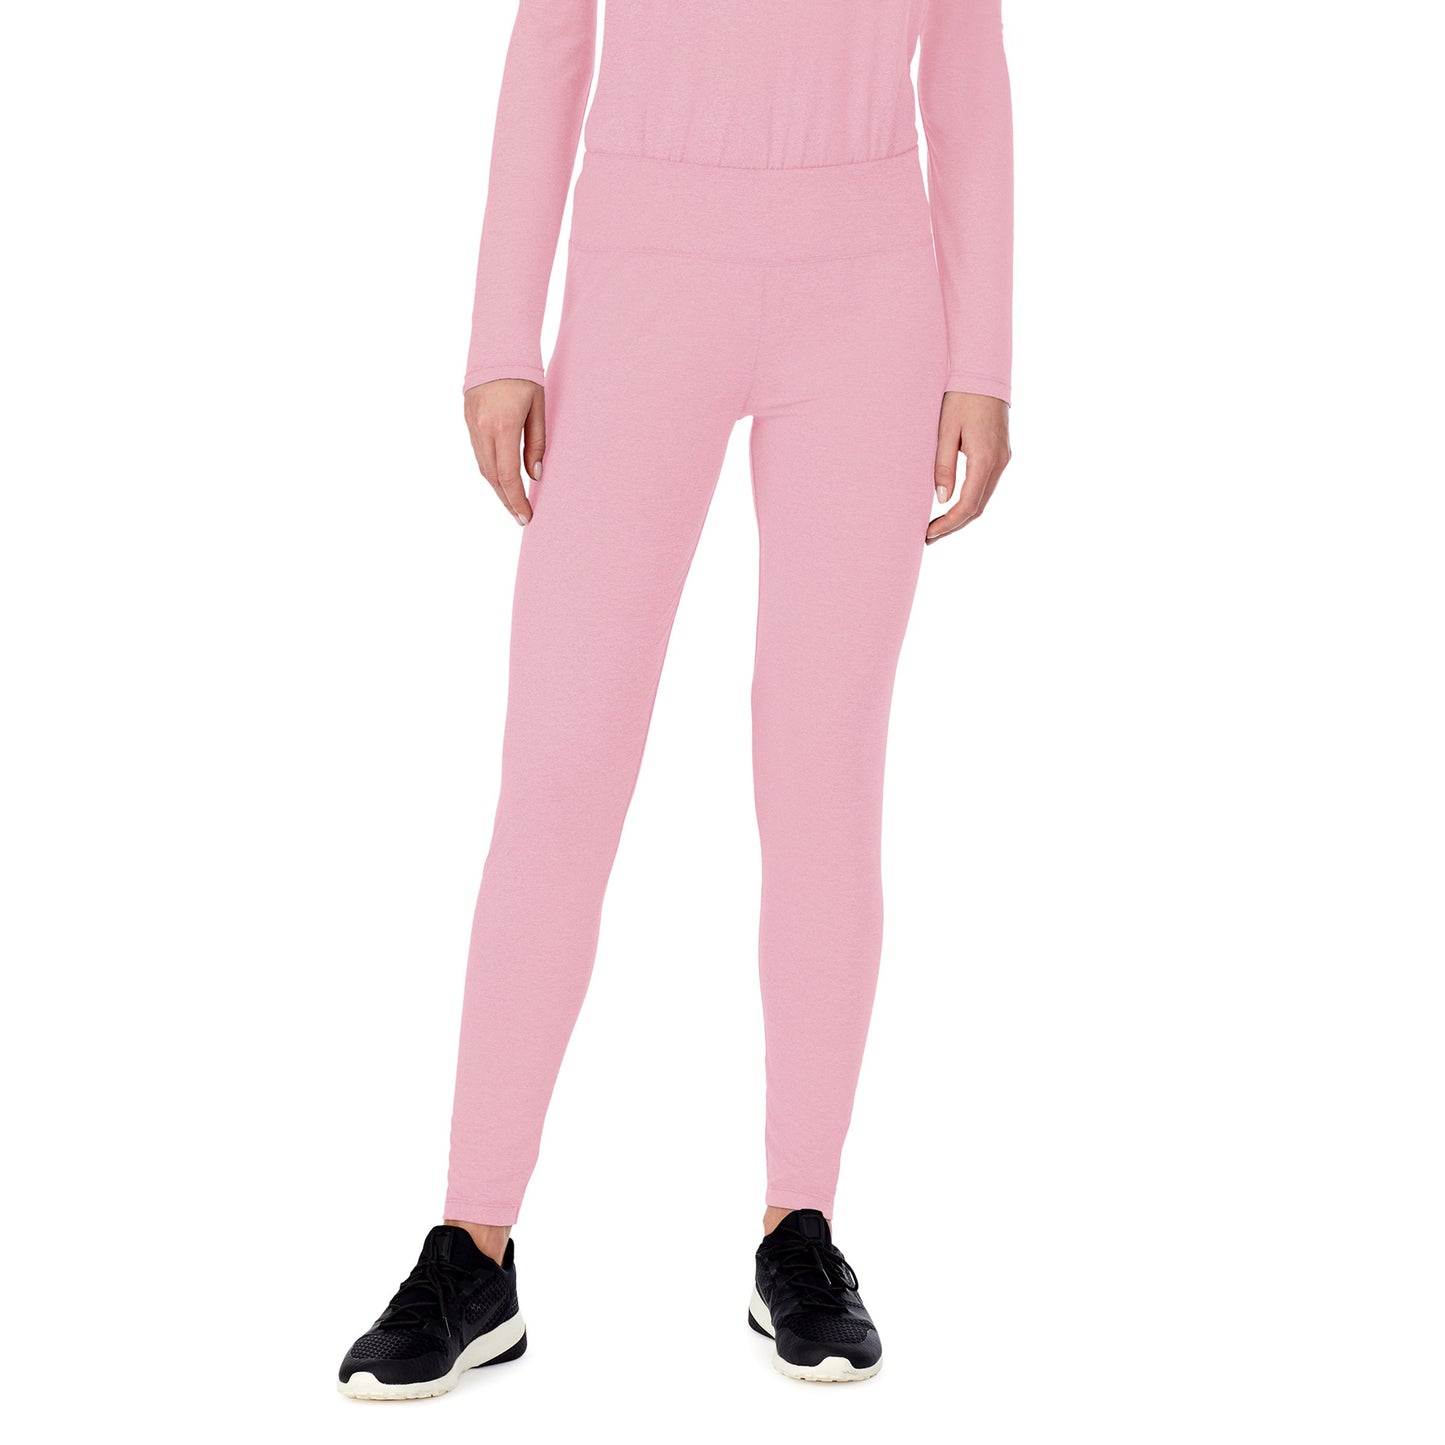 Pink;Model is wearing size S. She is 5’9”, Bust 32”, Waist 23", Hips 34.5”.@A lady wearing pink cameo underscrub legging.